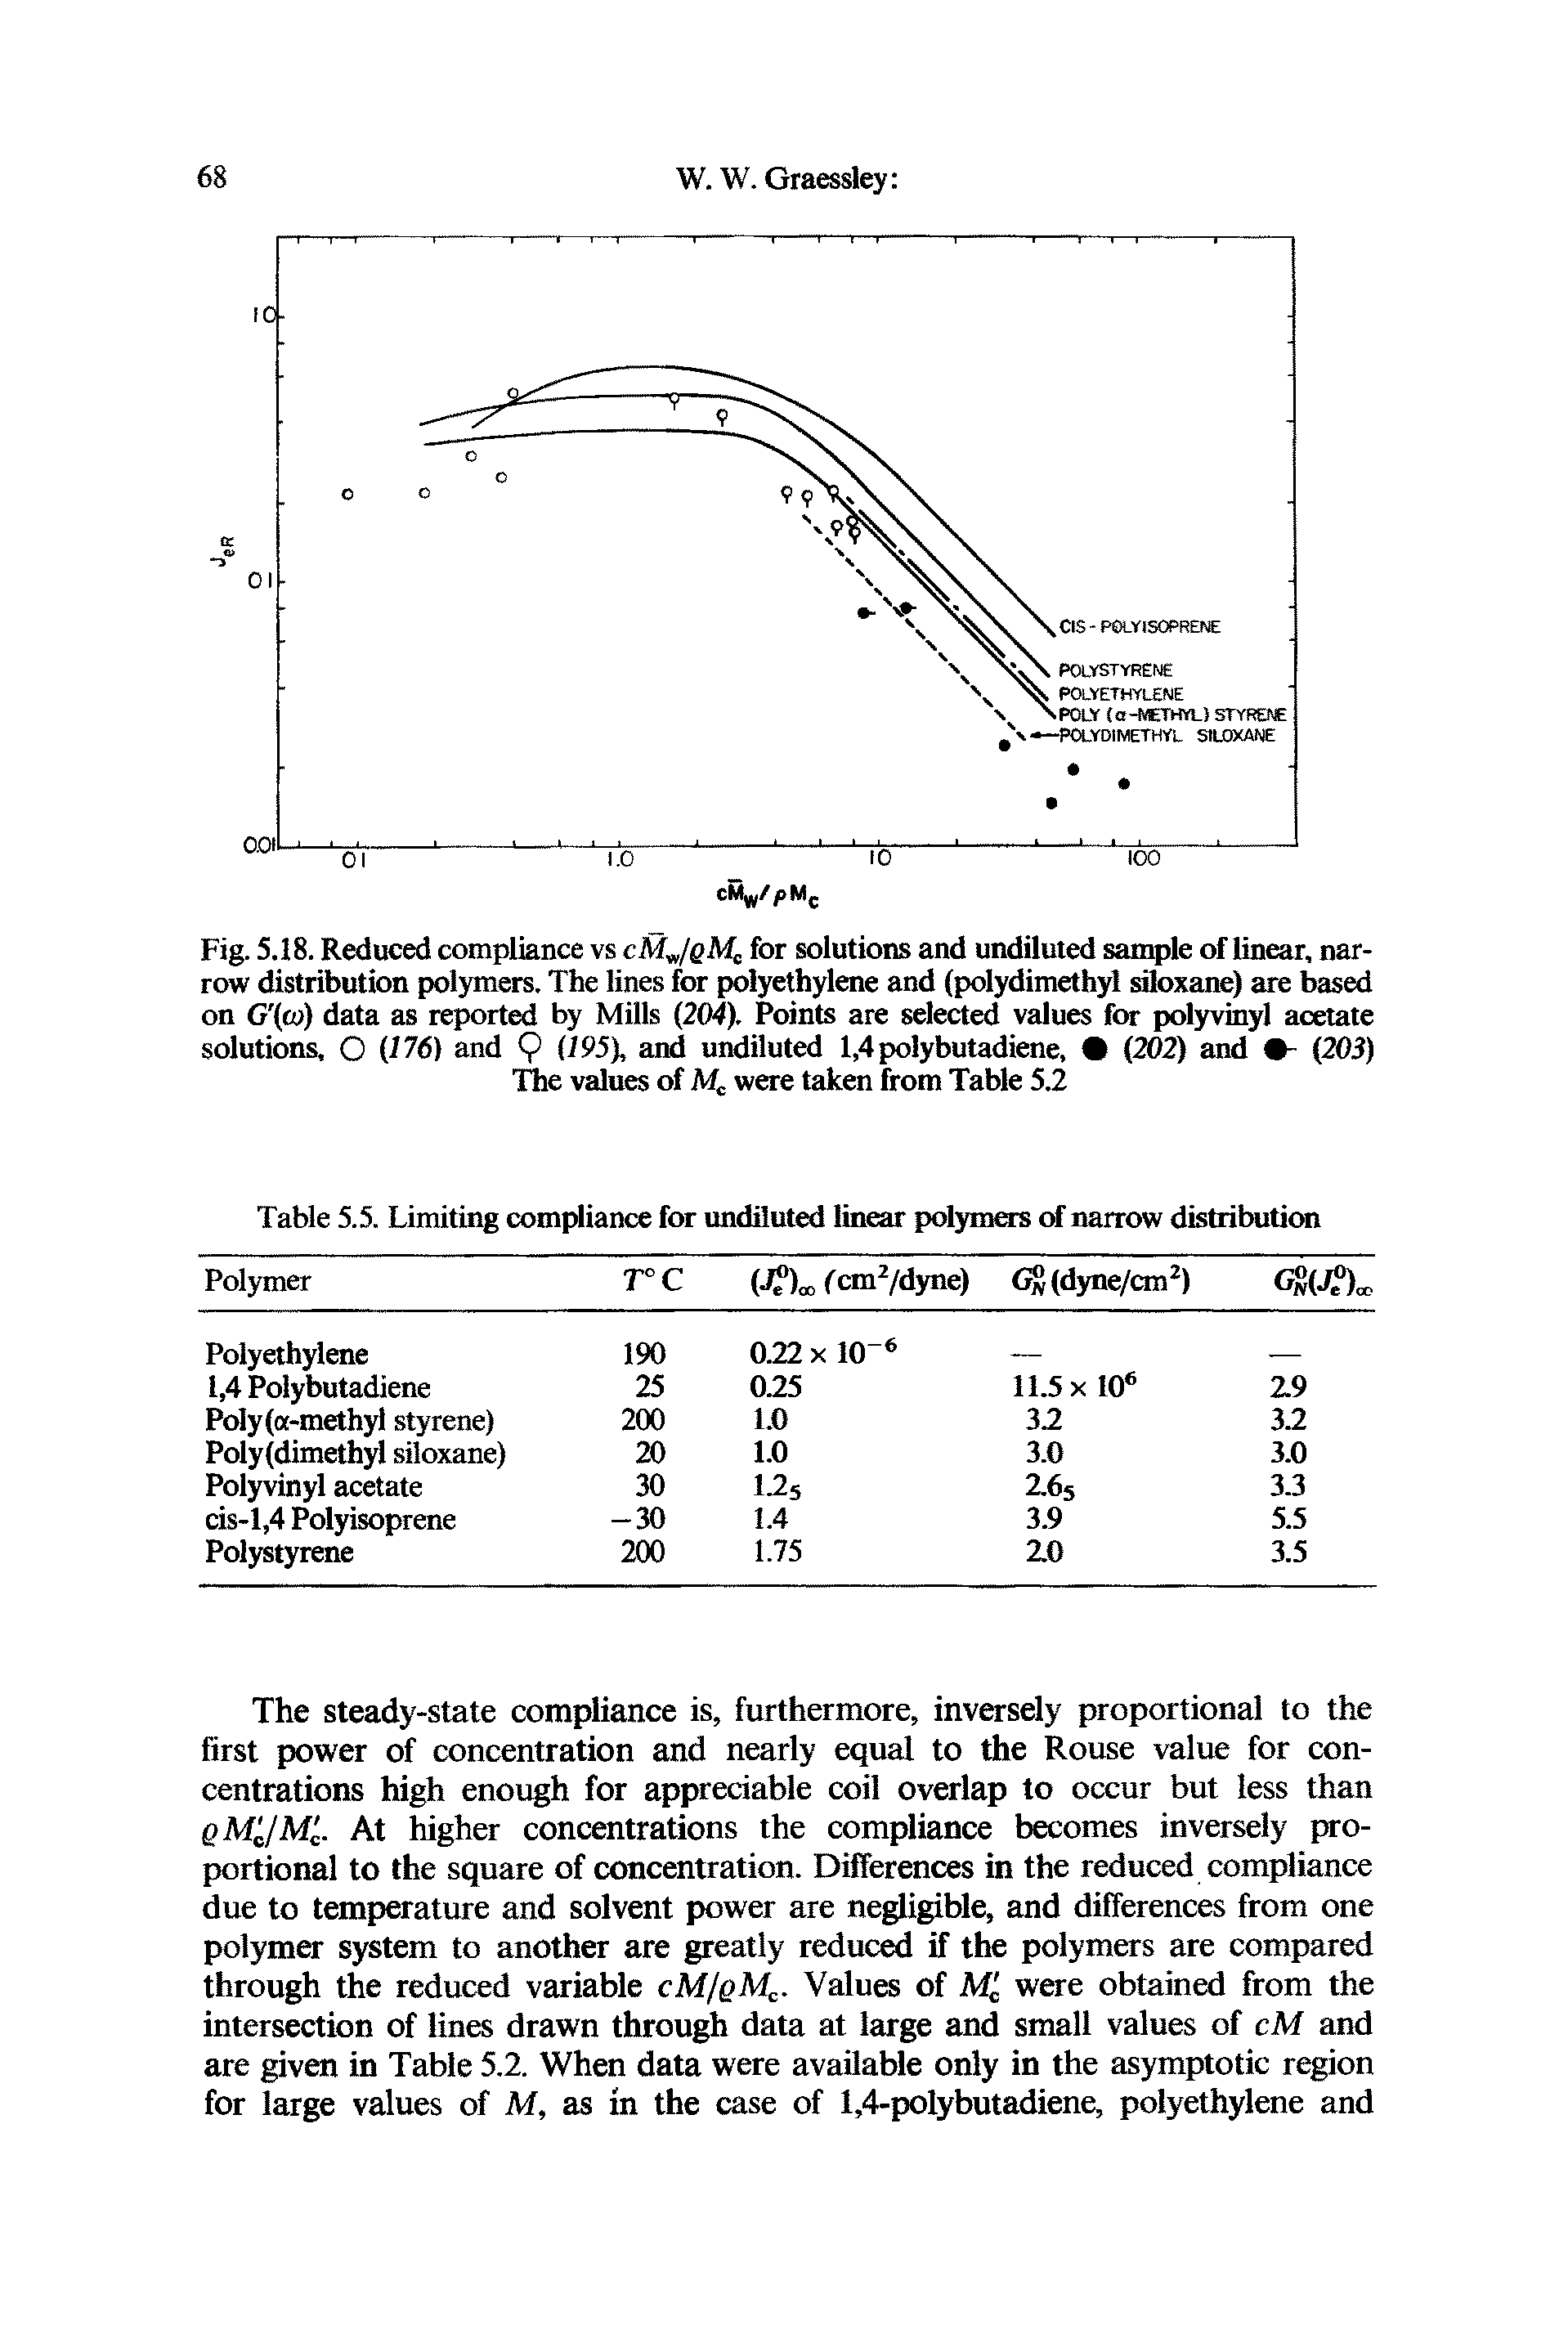 Fig. 5.18. Reduced compliance vs cM /qMc for solutions and undiluted sample of linear, narrow distribution polymers. The lines for polyethylene and (polydimethyl siloxane) are based on G (w) data as reported by Mills (204). Points are selected values for polyvinyl acetate solutions, O (176) and 9 (195), and undiluted 1,4 polybutadiene, (202) and - (203) The values of Mc were taken from Table 5.2...